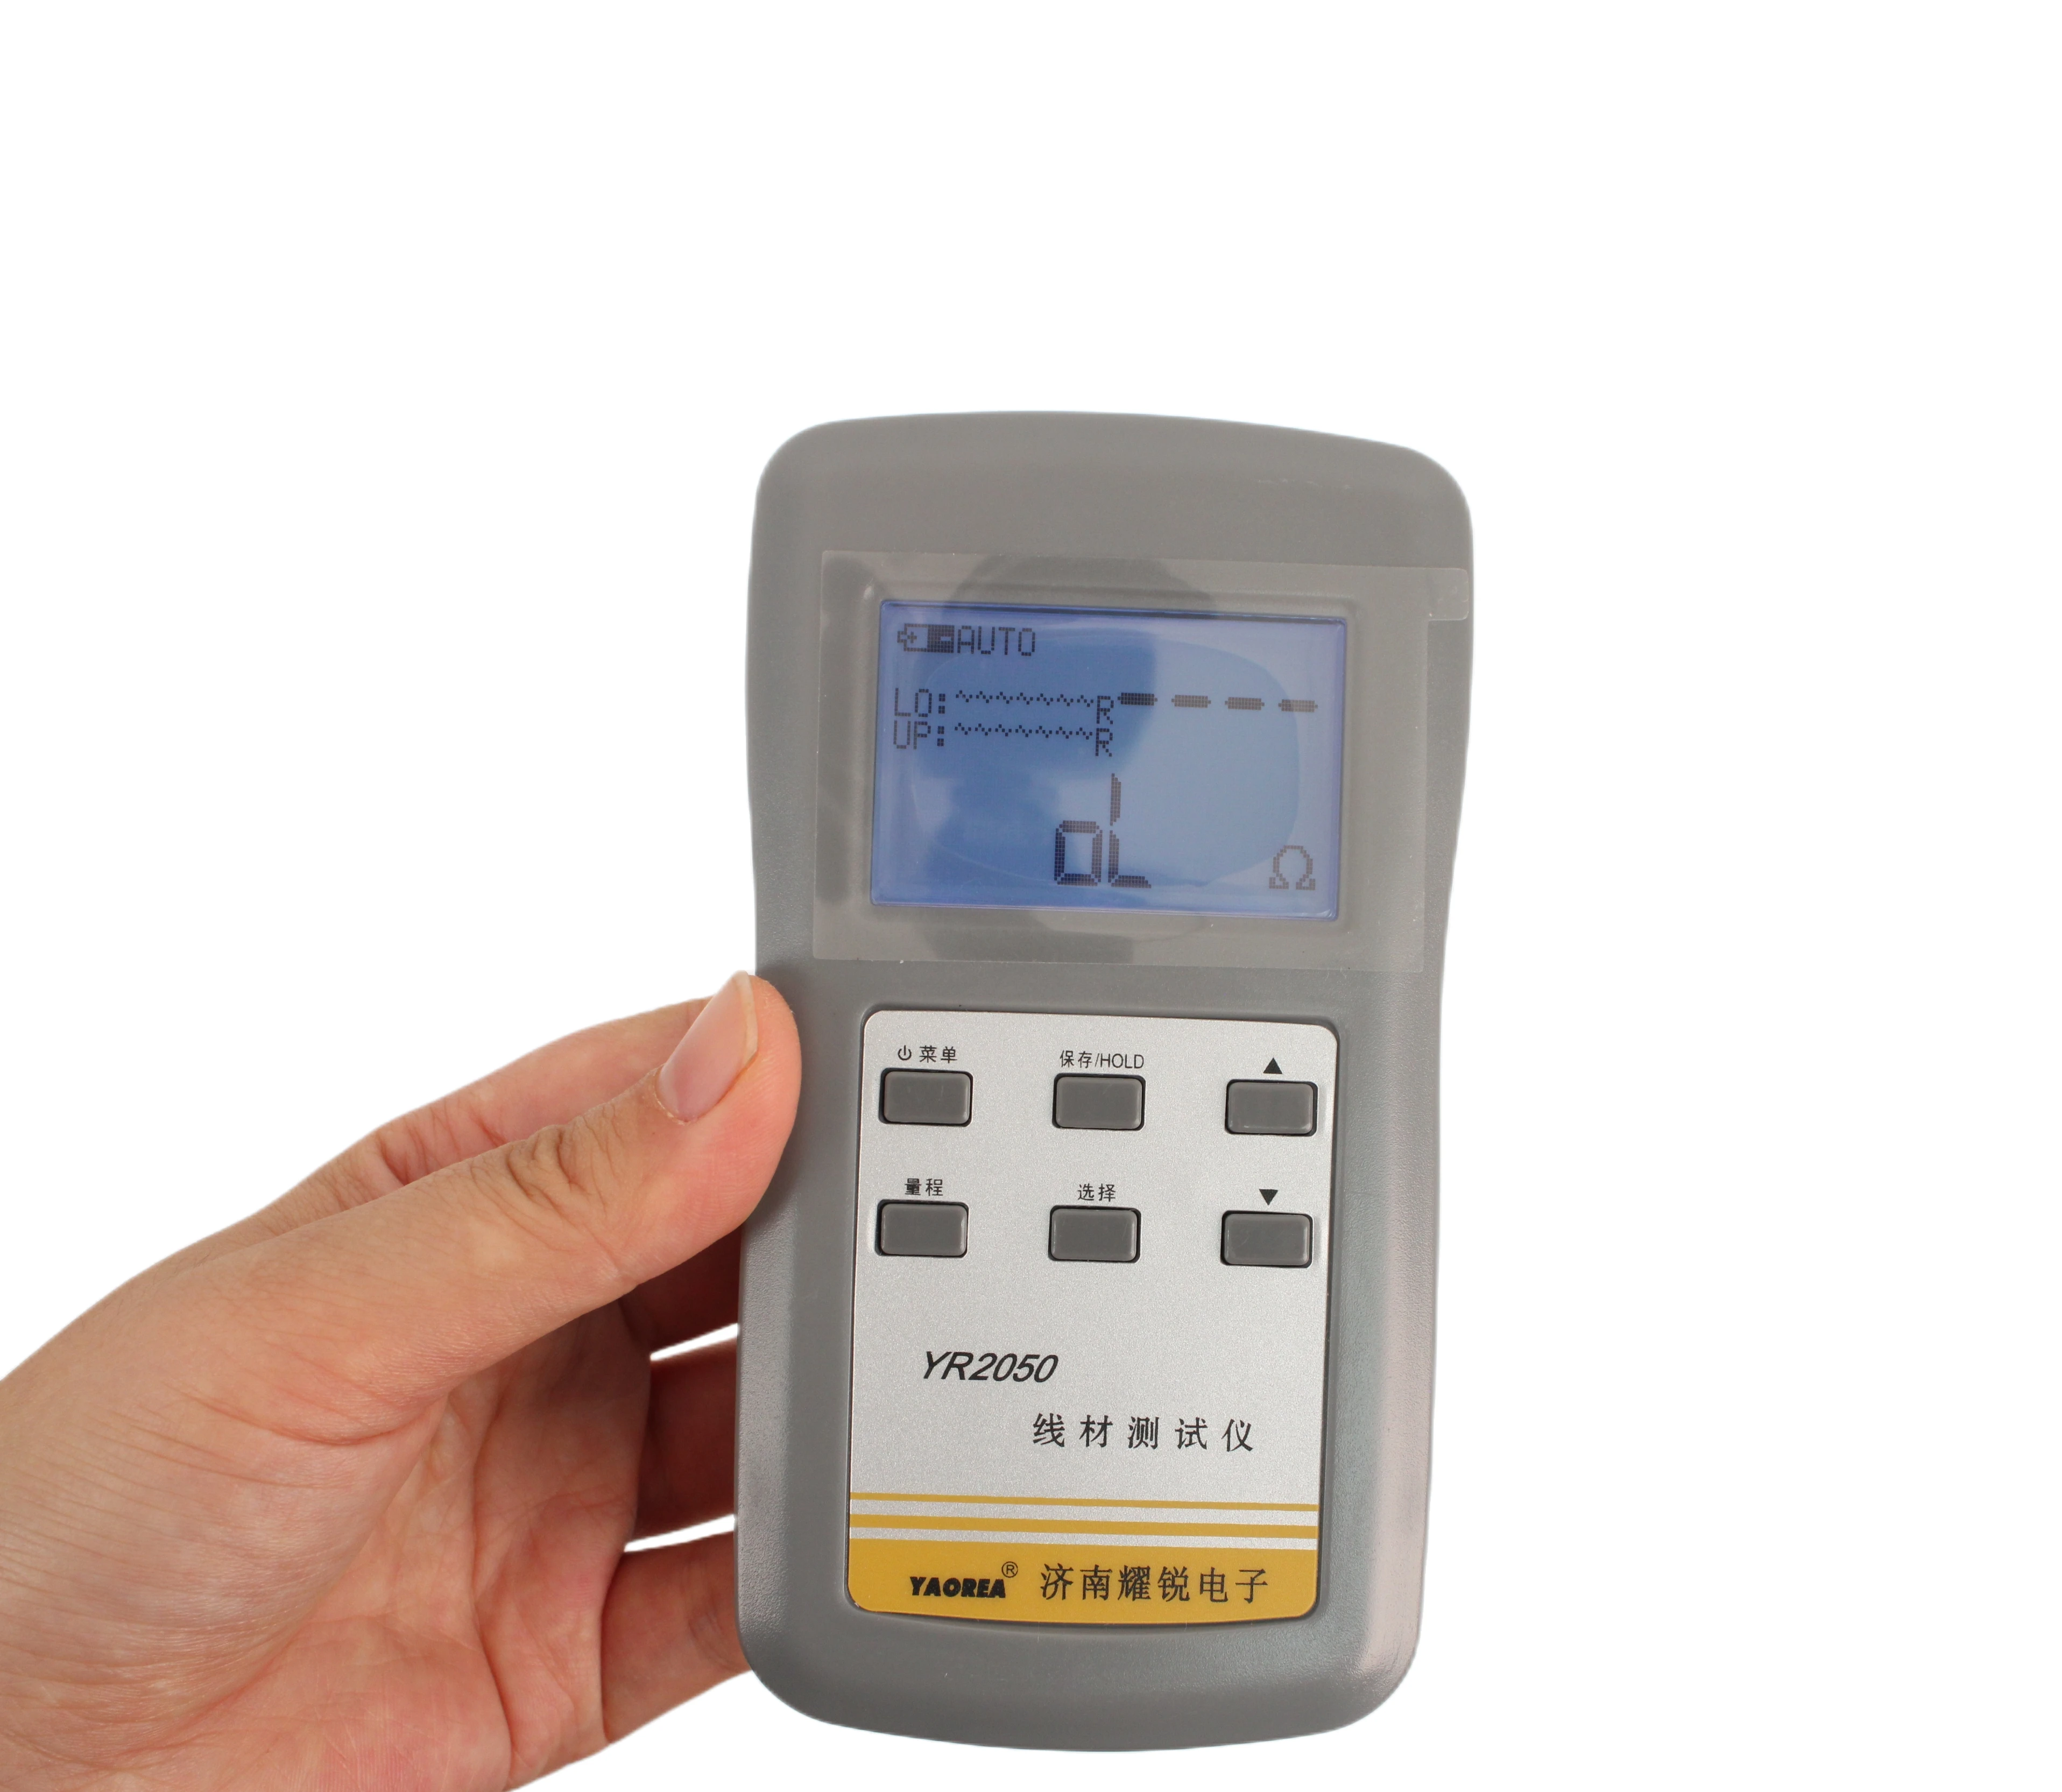 34/5000 YR2050 Wire electrode coil resistance tester wire resistance